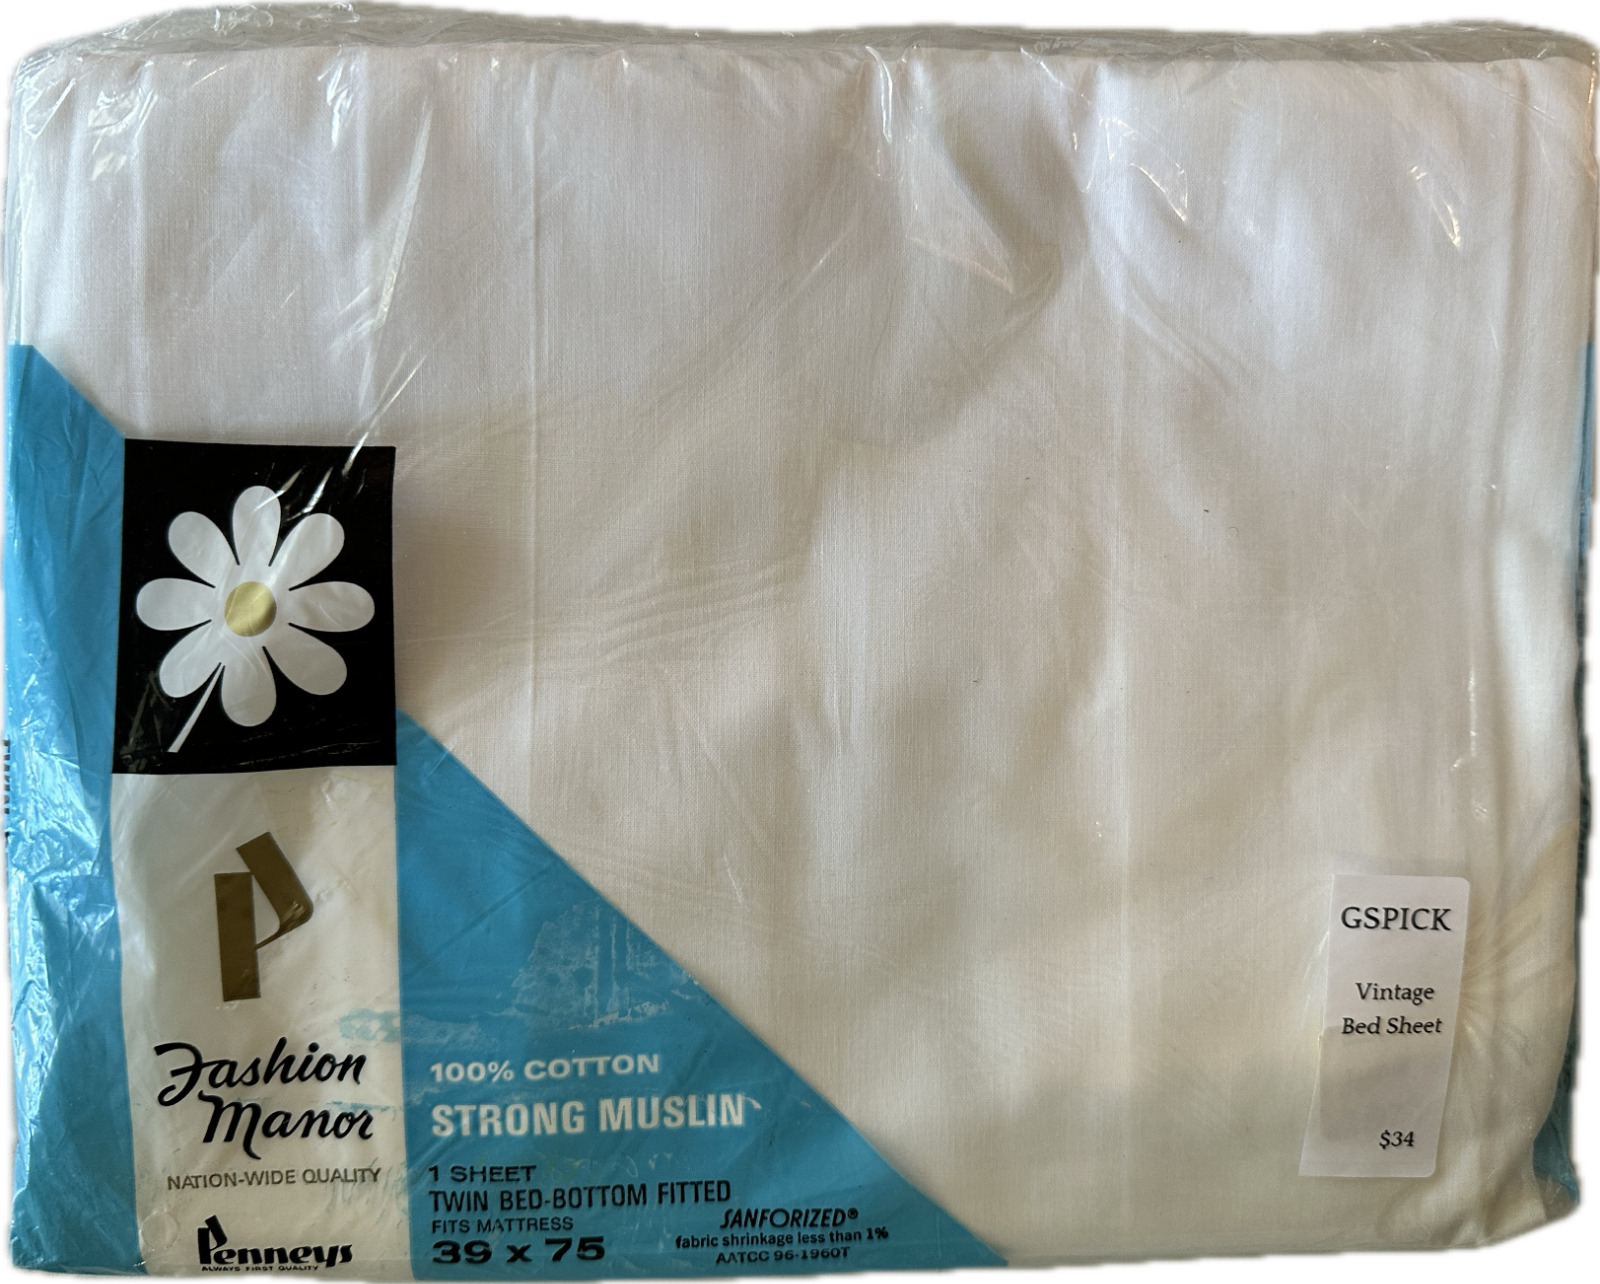 Vintage JC Penny Fashion Manor Strong Muslin Twin Fitted Bed Sheet White NIP